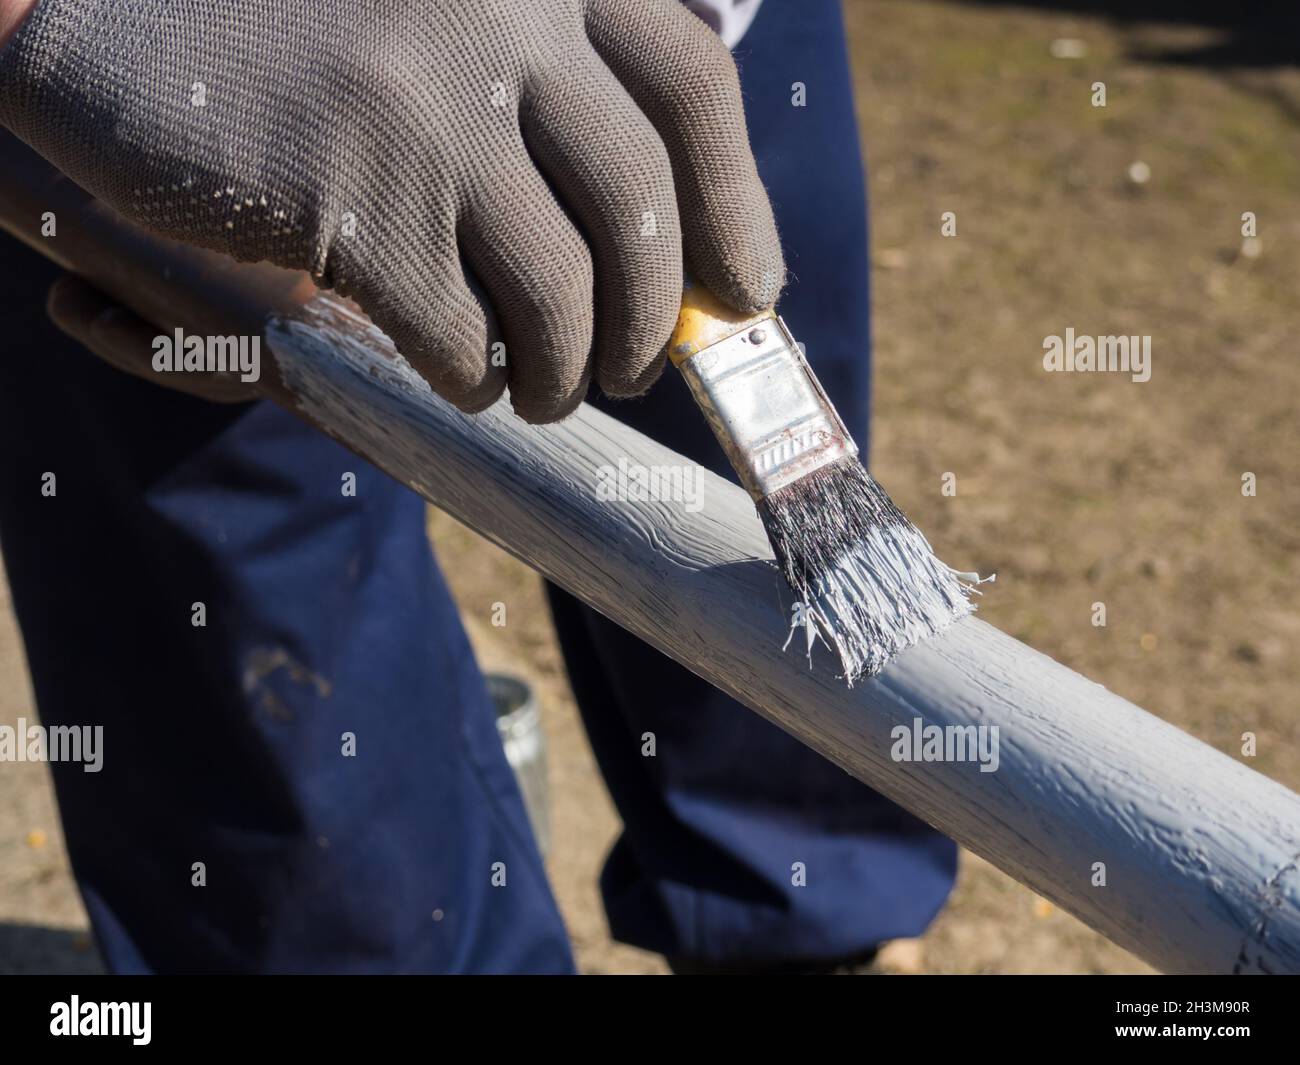 person primer painted metal pipe outdoors Stock Photo